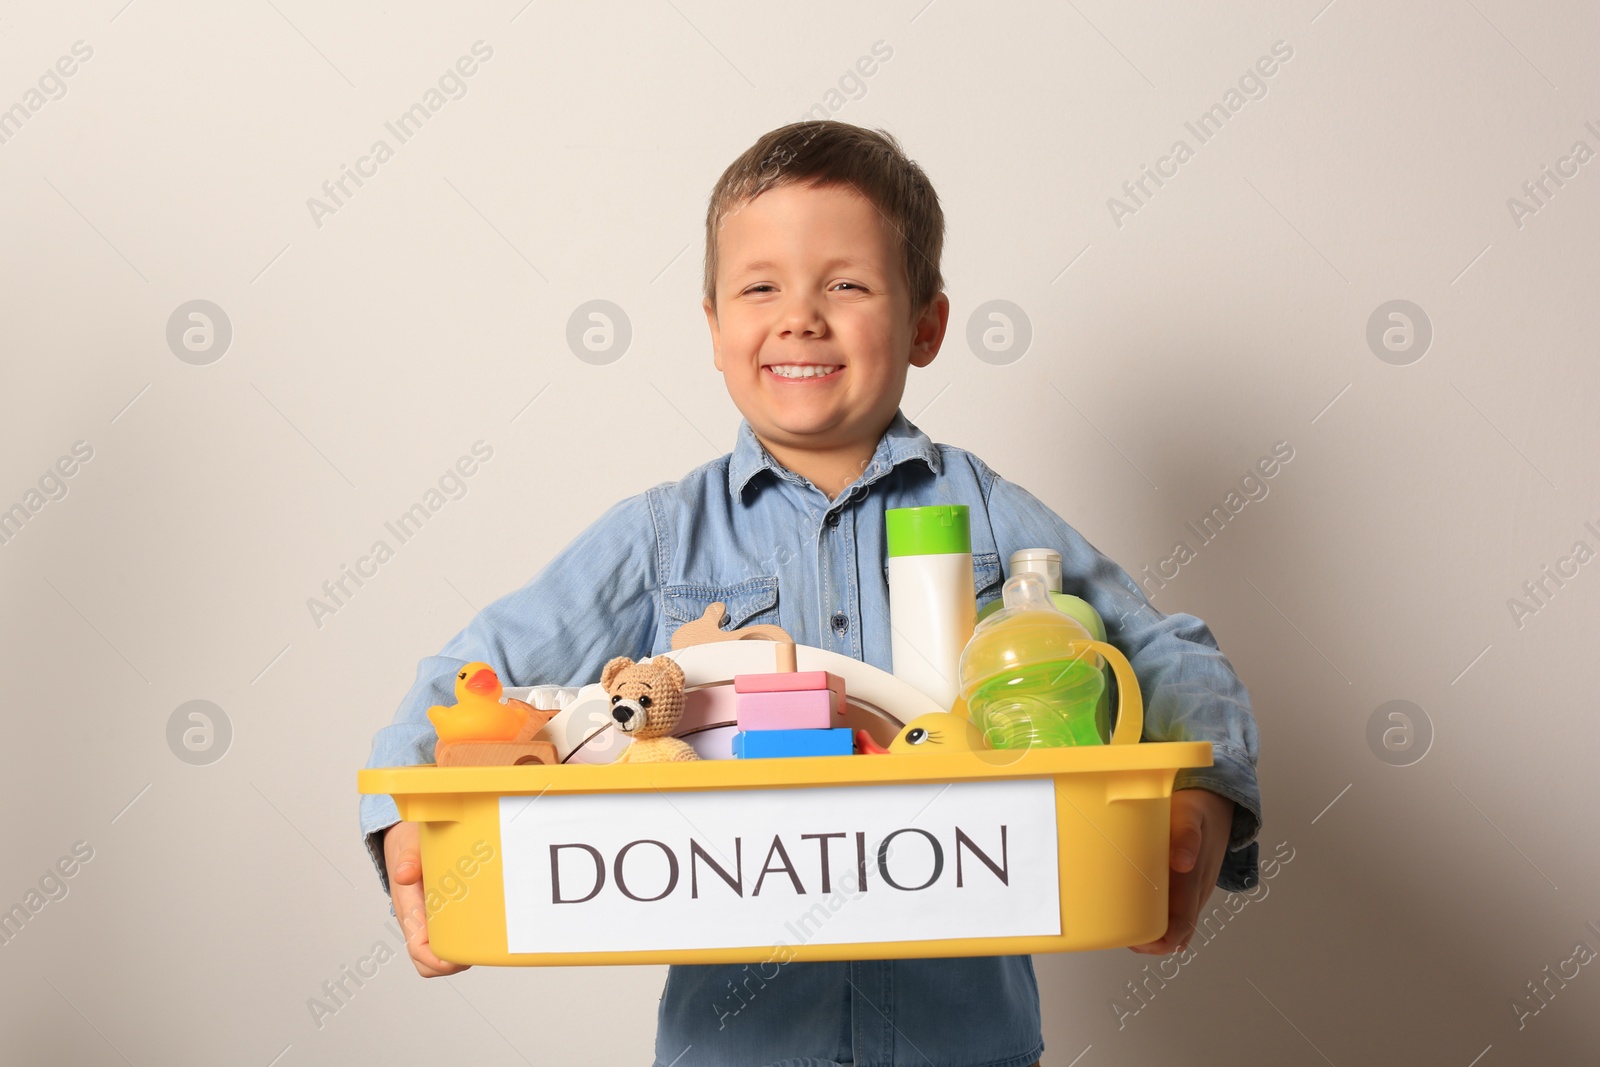 Photo of Cute little boy holding donation box with goods and toys against light background